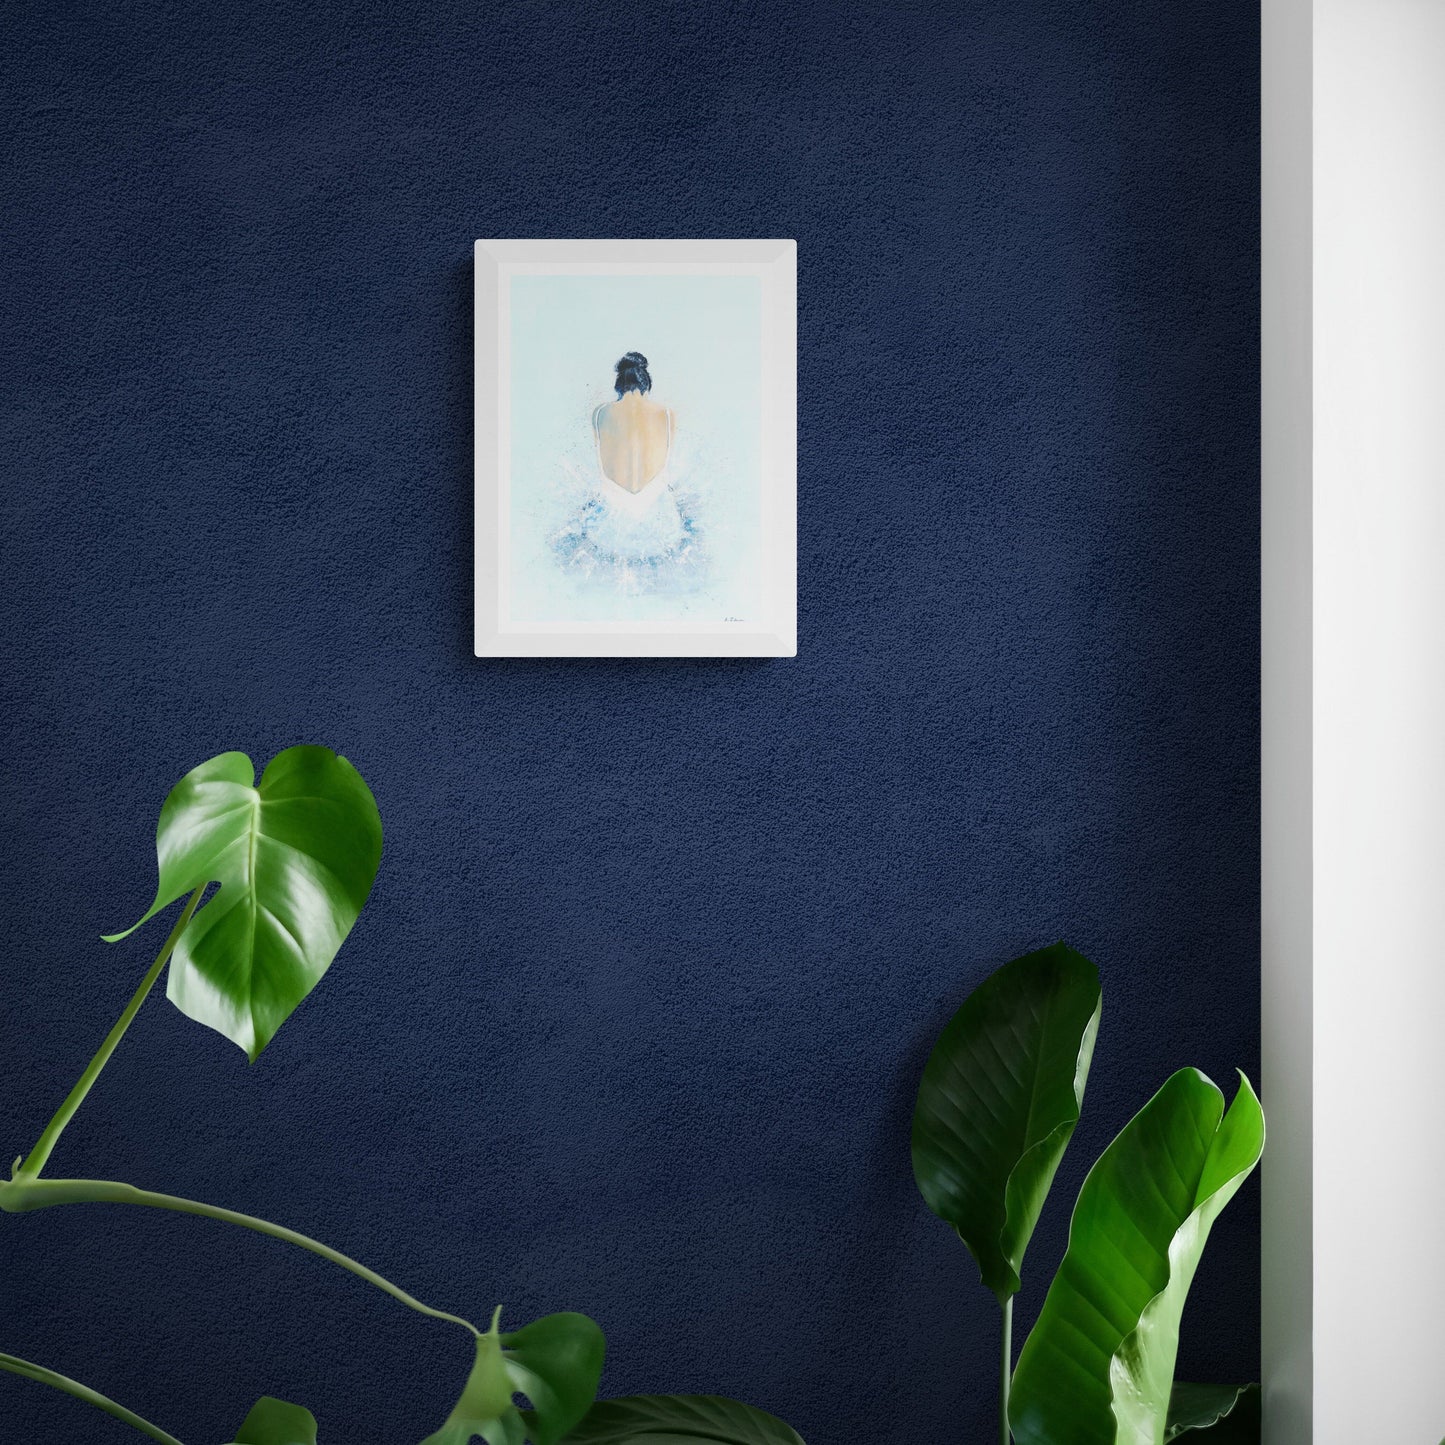 A print of an acrylic painting of a woman sat on the floor wearing a tutu. It is hung on a dark blue wall with a house plant just below